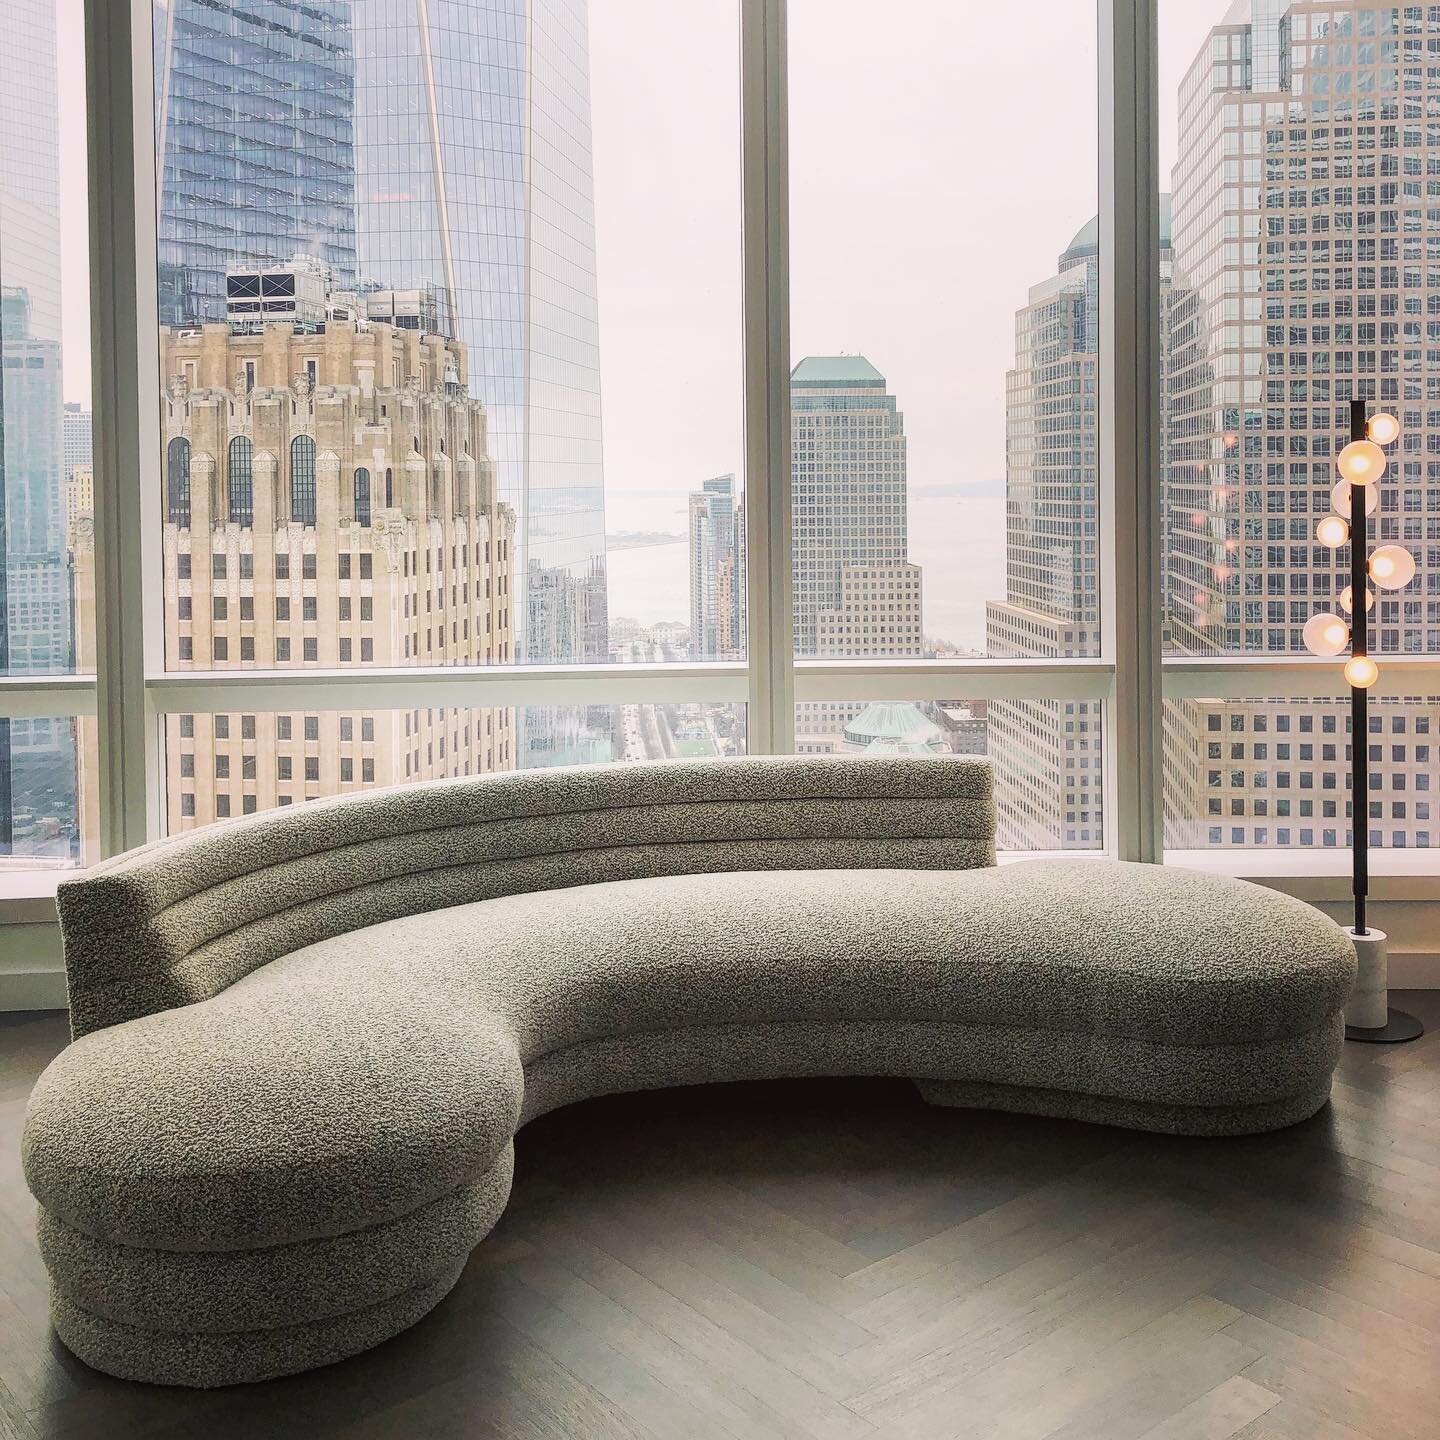 Obsessing over this new custom curved sofa for my TriBeCa project! I am in love with every selection for this project! Stay tuned!!! #interlude #interludehome #hudsonvalleylighting #elledecor #archdigest #111murray #tribeca #interiordesign #interiord